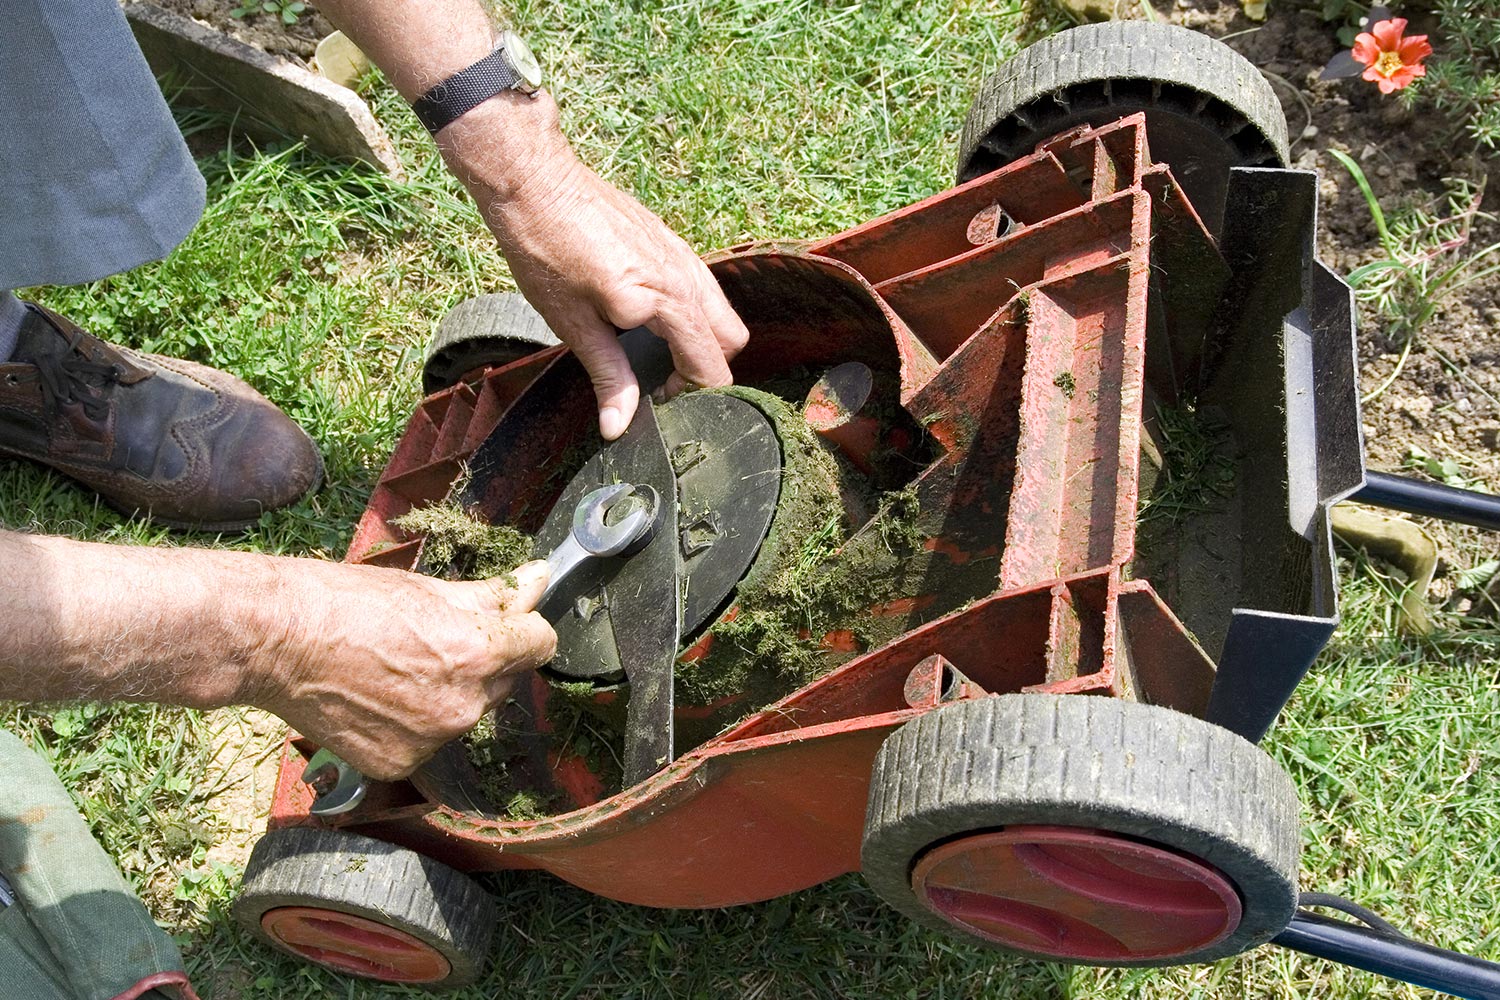 Hands fixing an overturned lawnmower with wrench